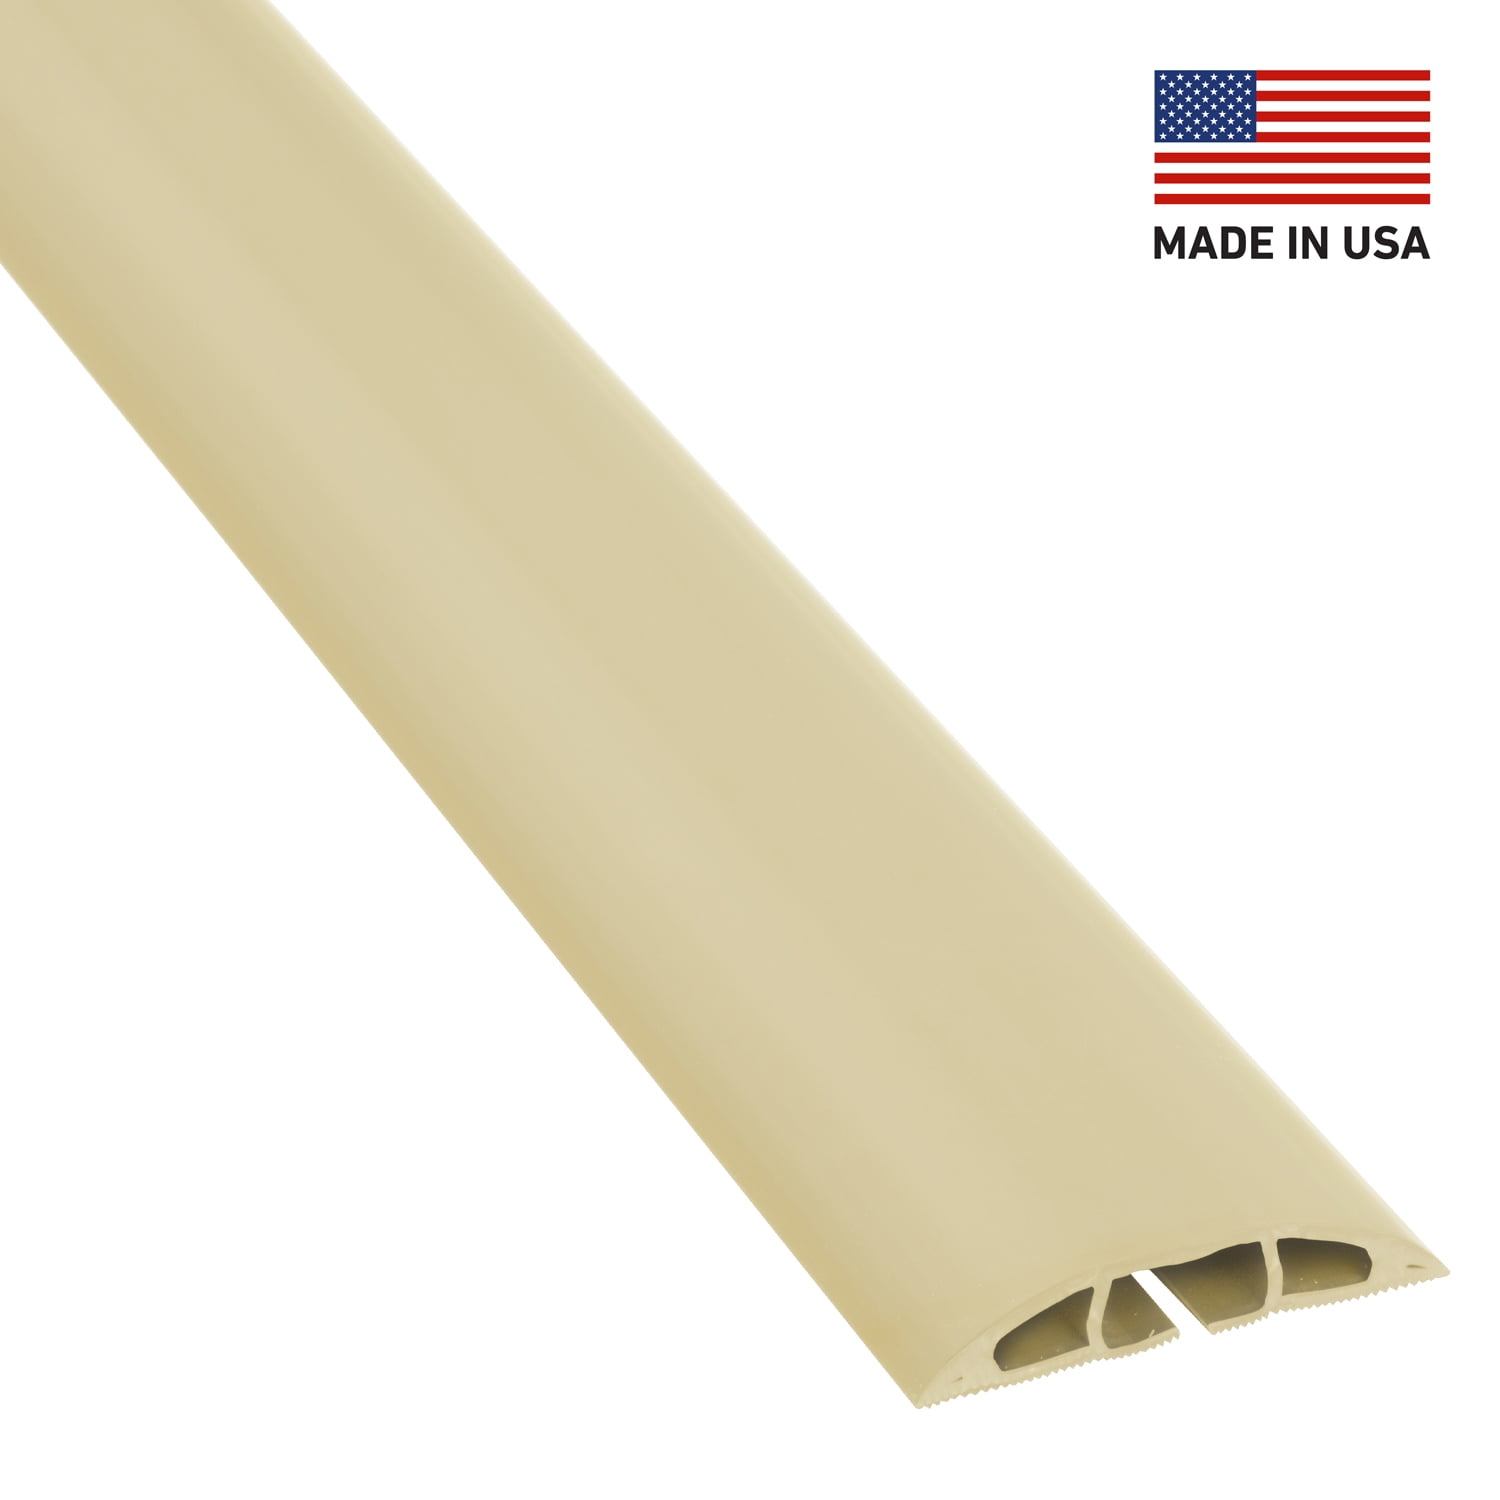 LZEOY Cable Cover Floor 6FT, Beige Floor Cord Cover, Single Cord